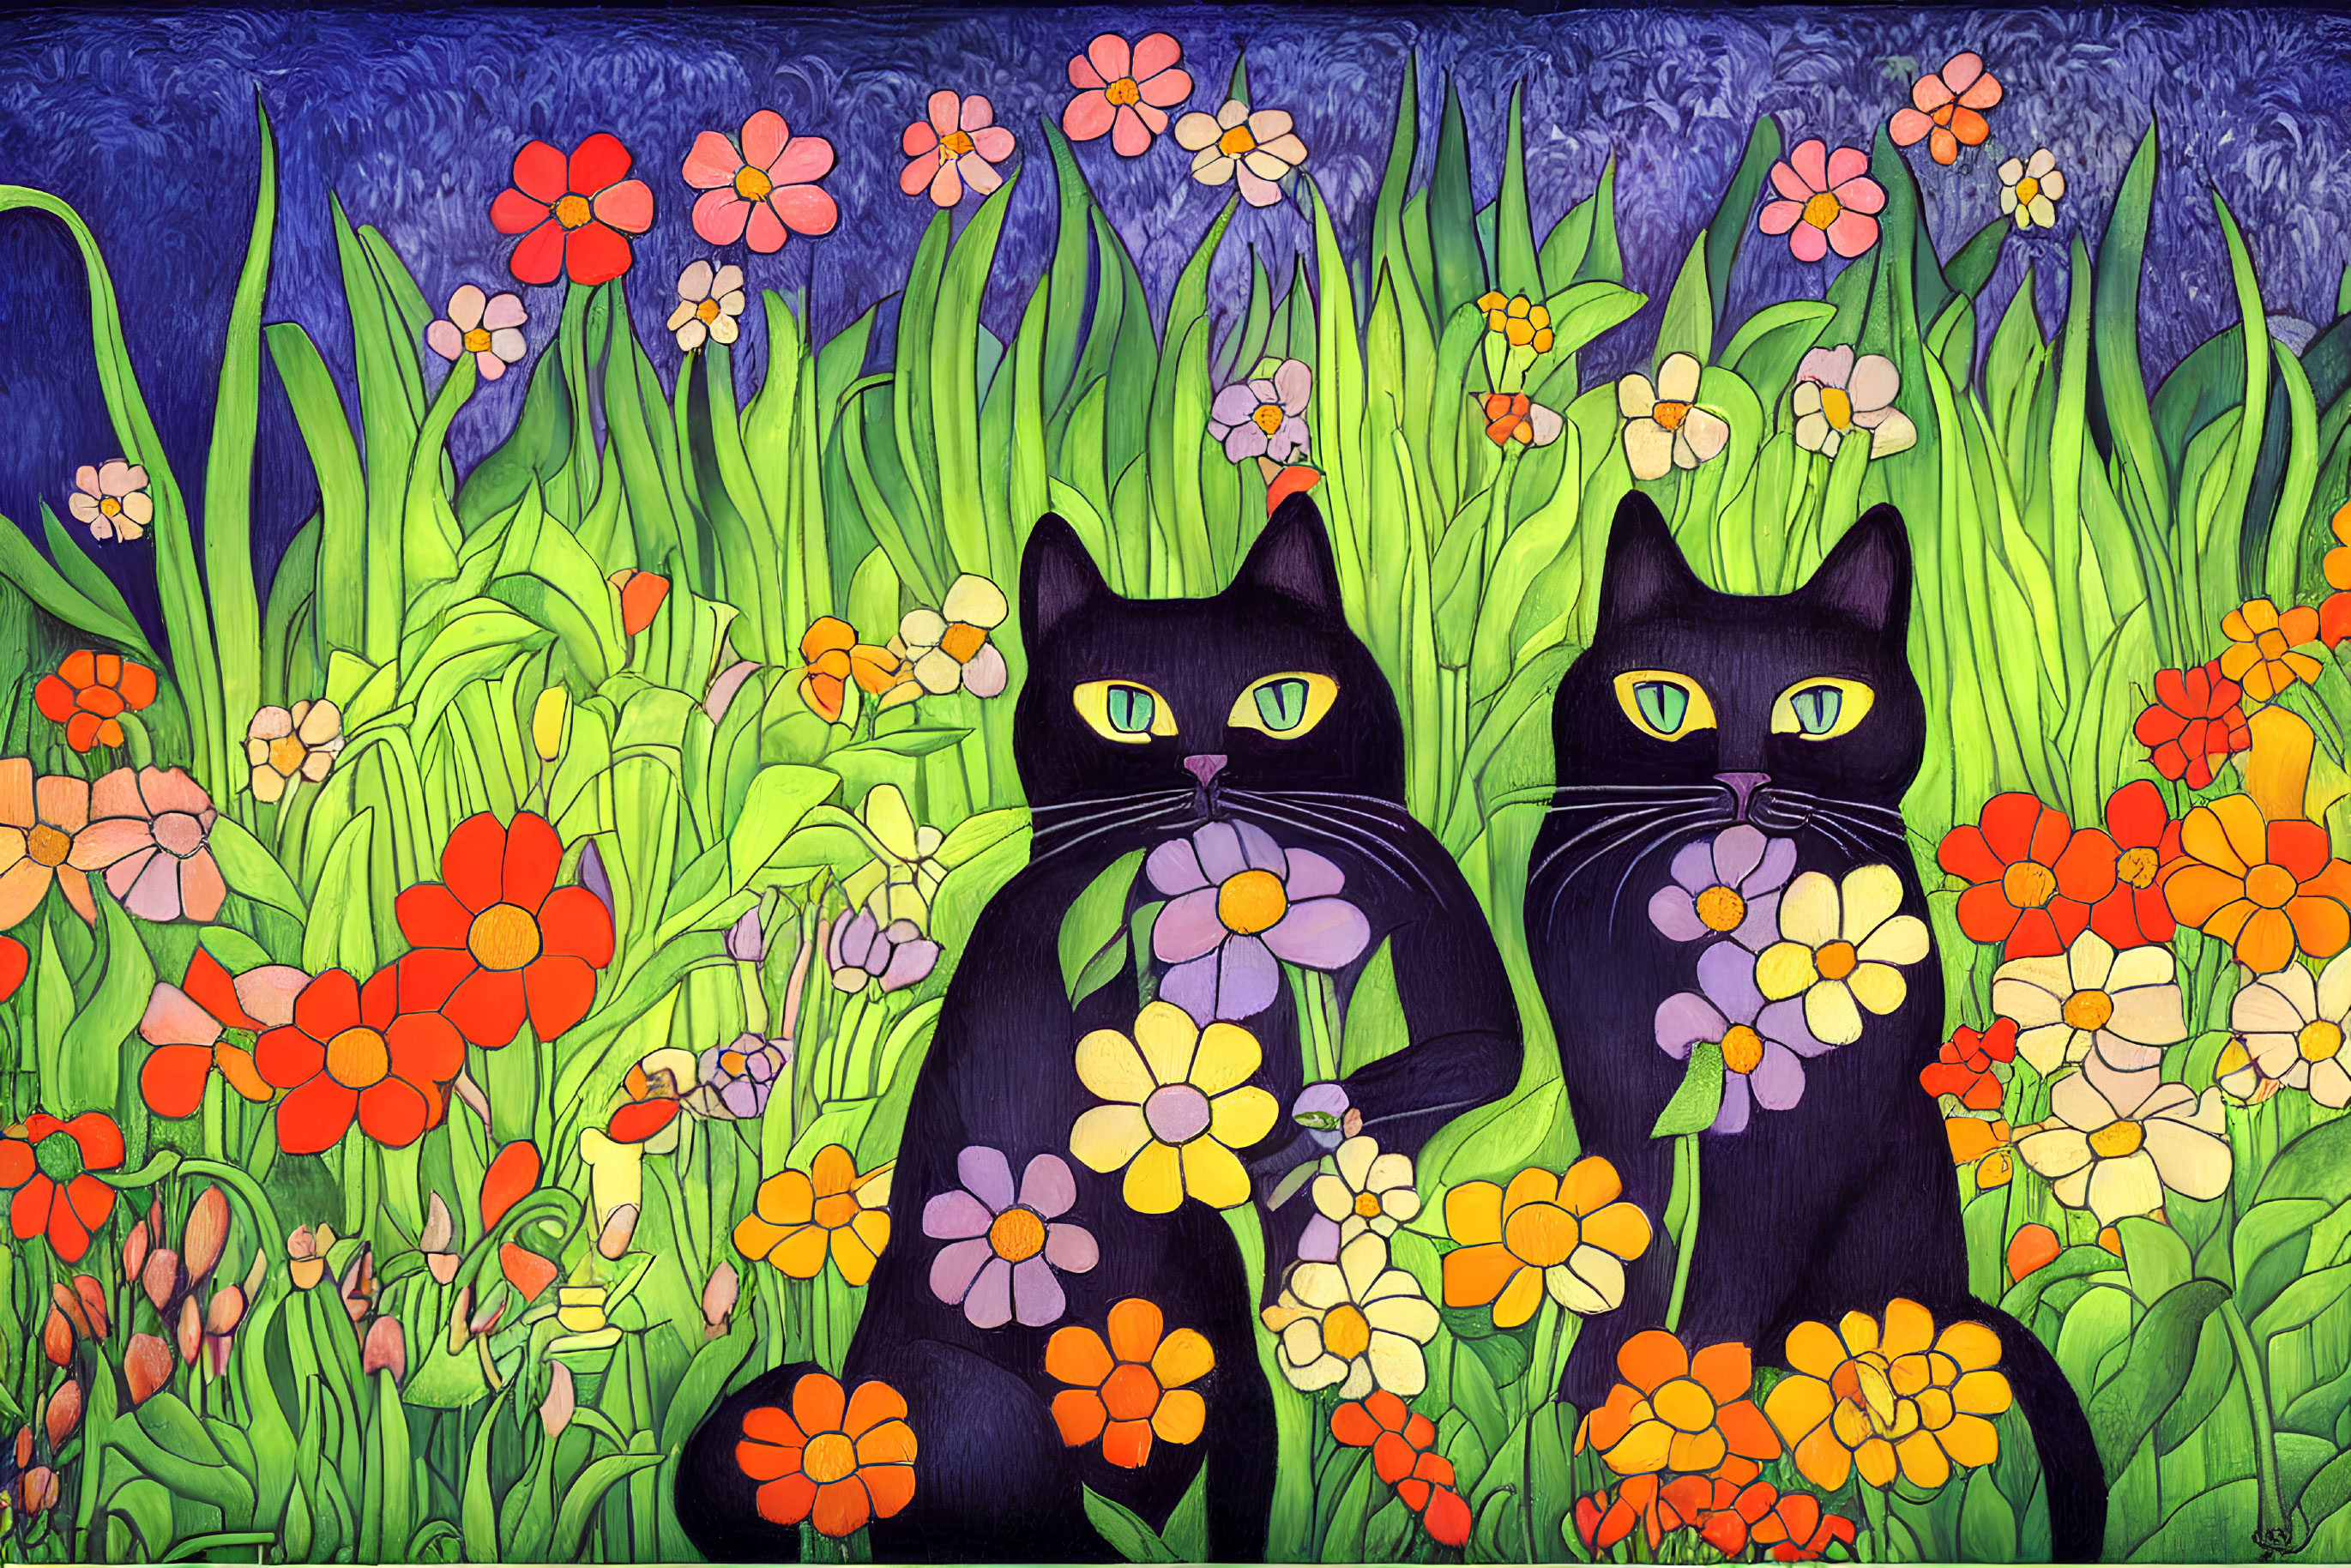 Two black cats in colorful flower field under textured blue sky